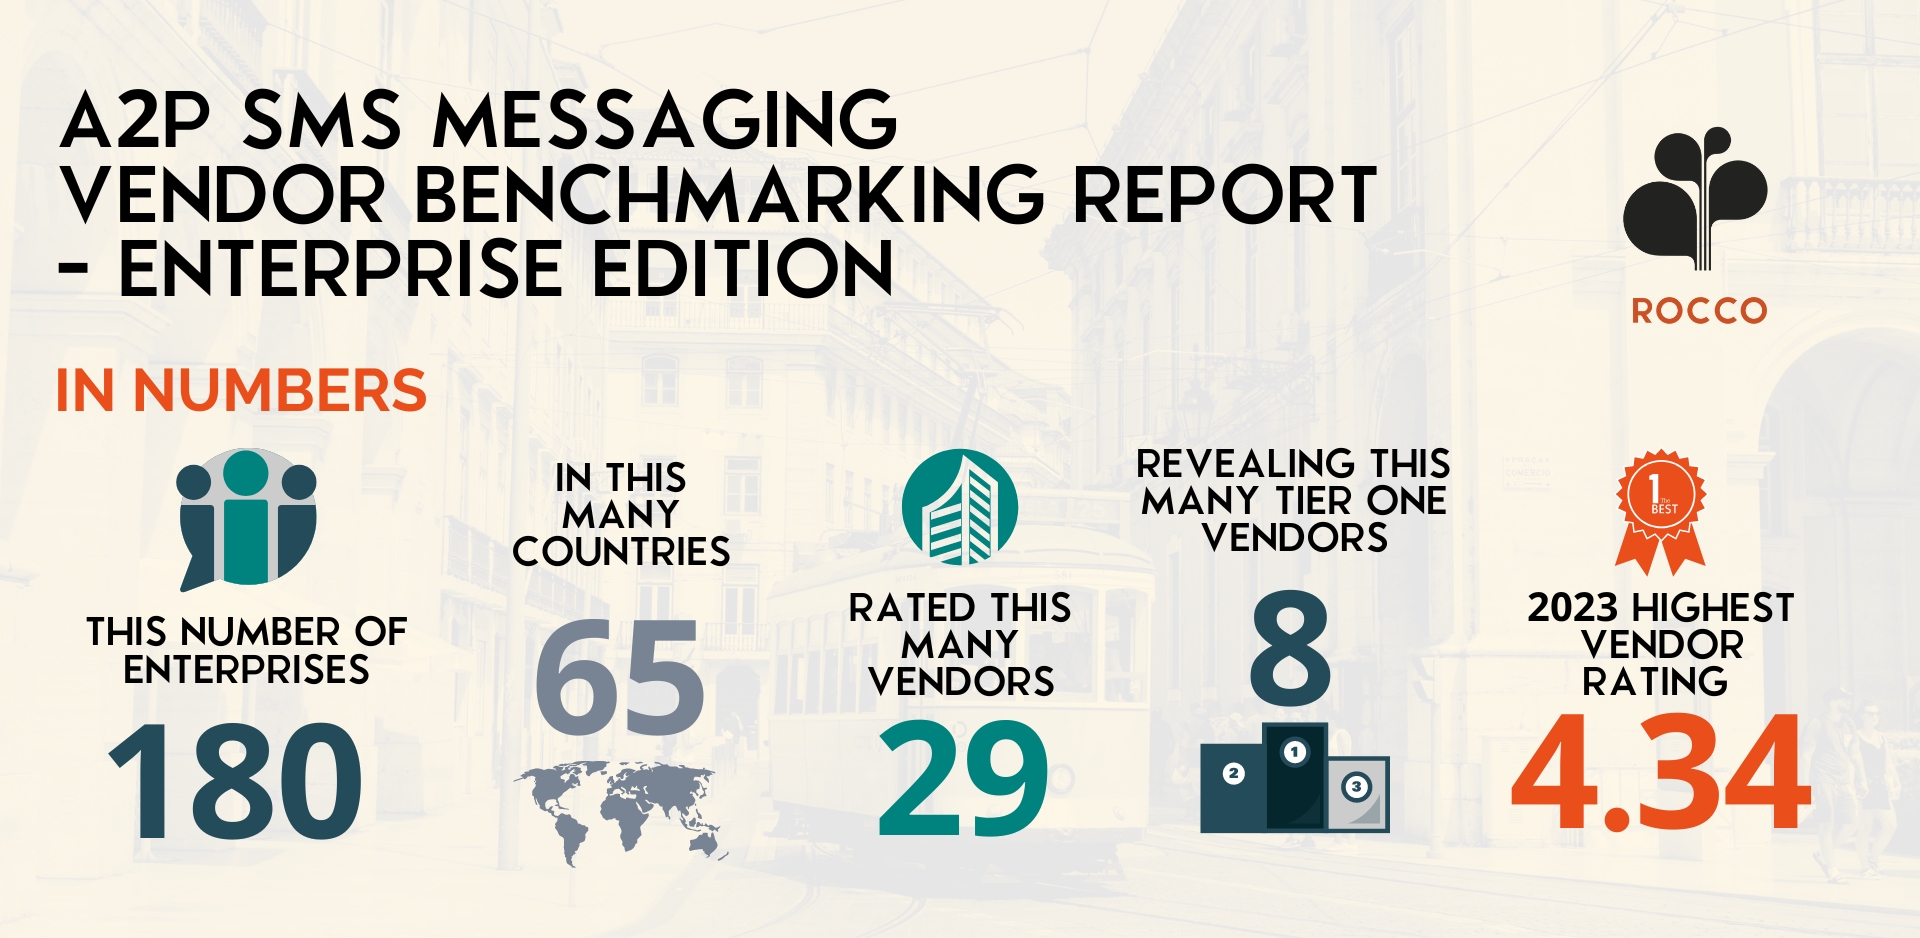 A2P SMS Market Impact Report Enterprise edition 2023 - Report in numbers